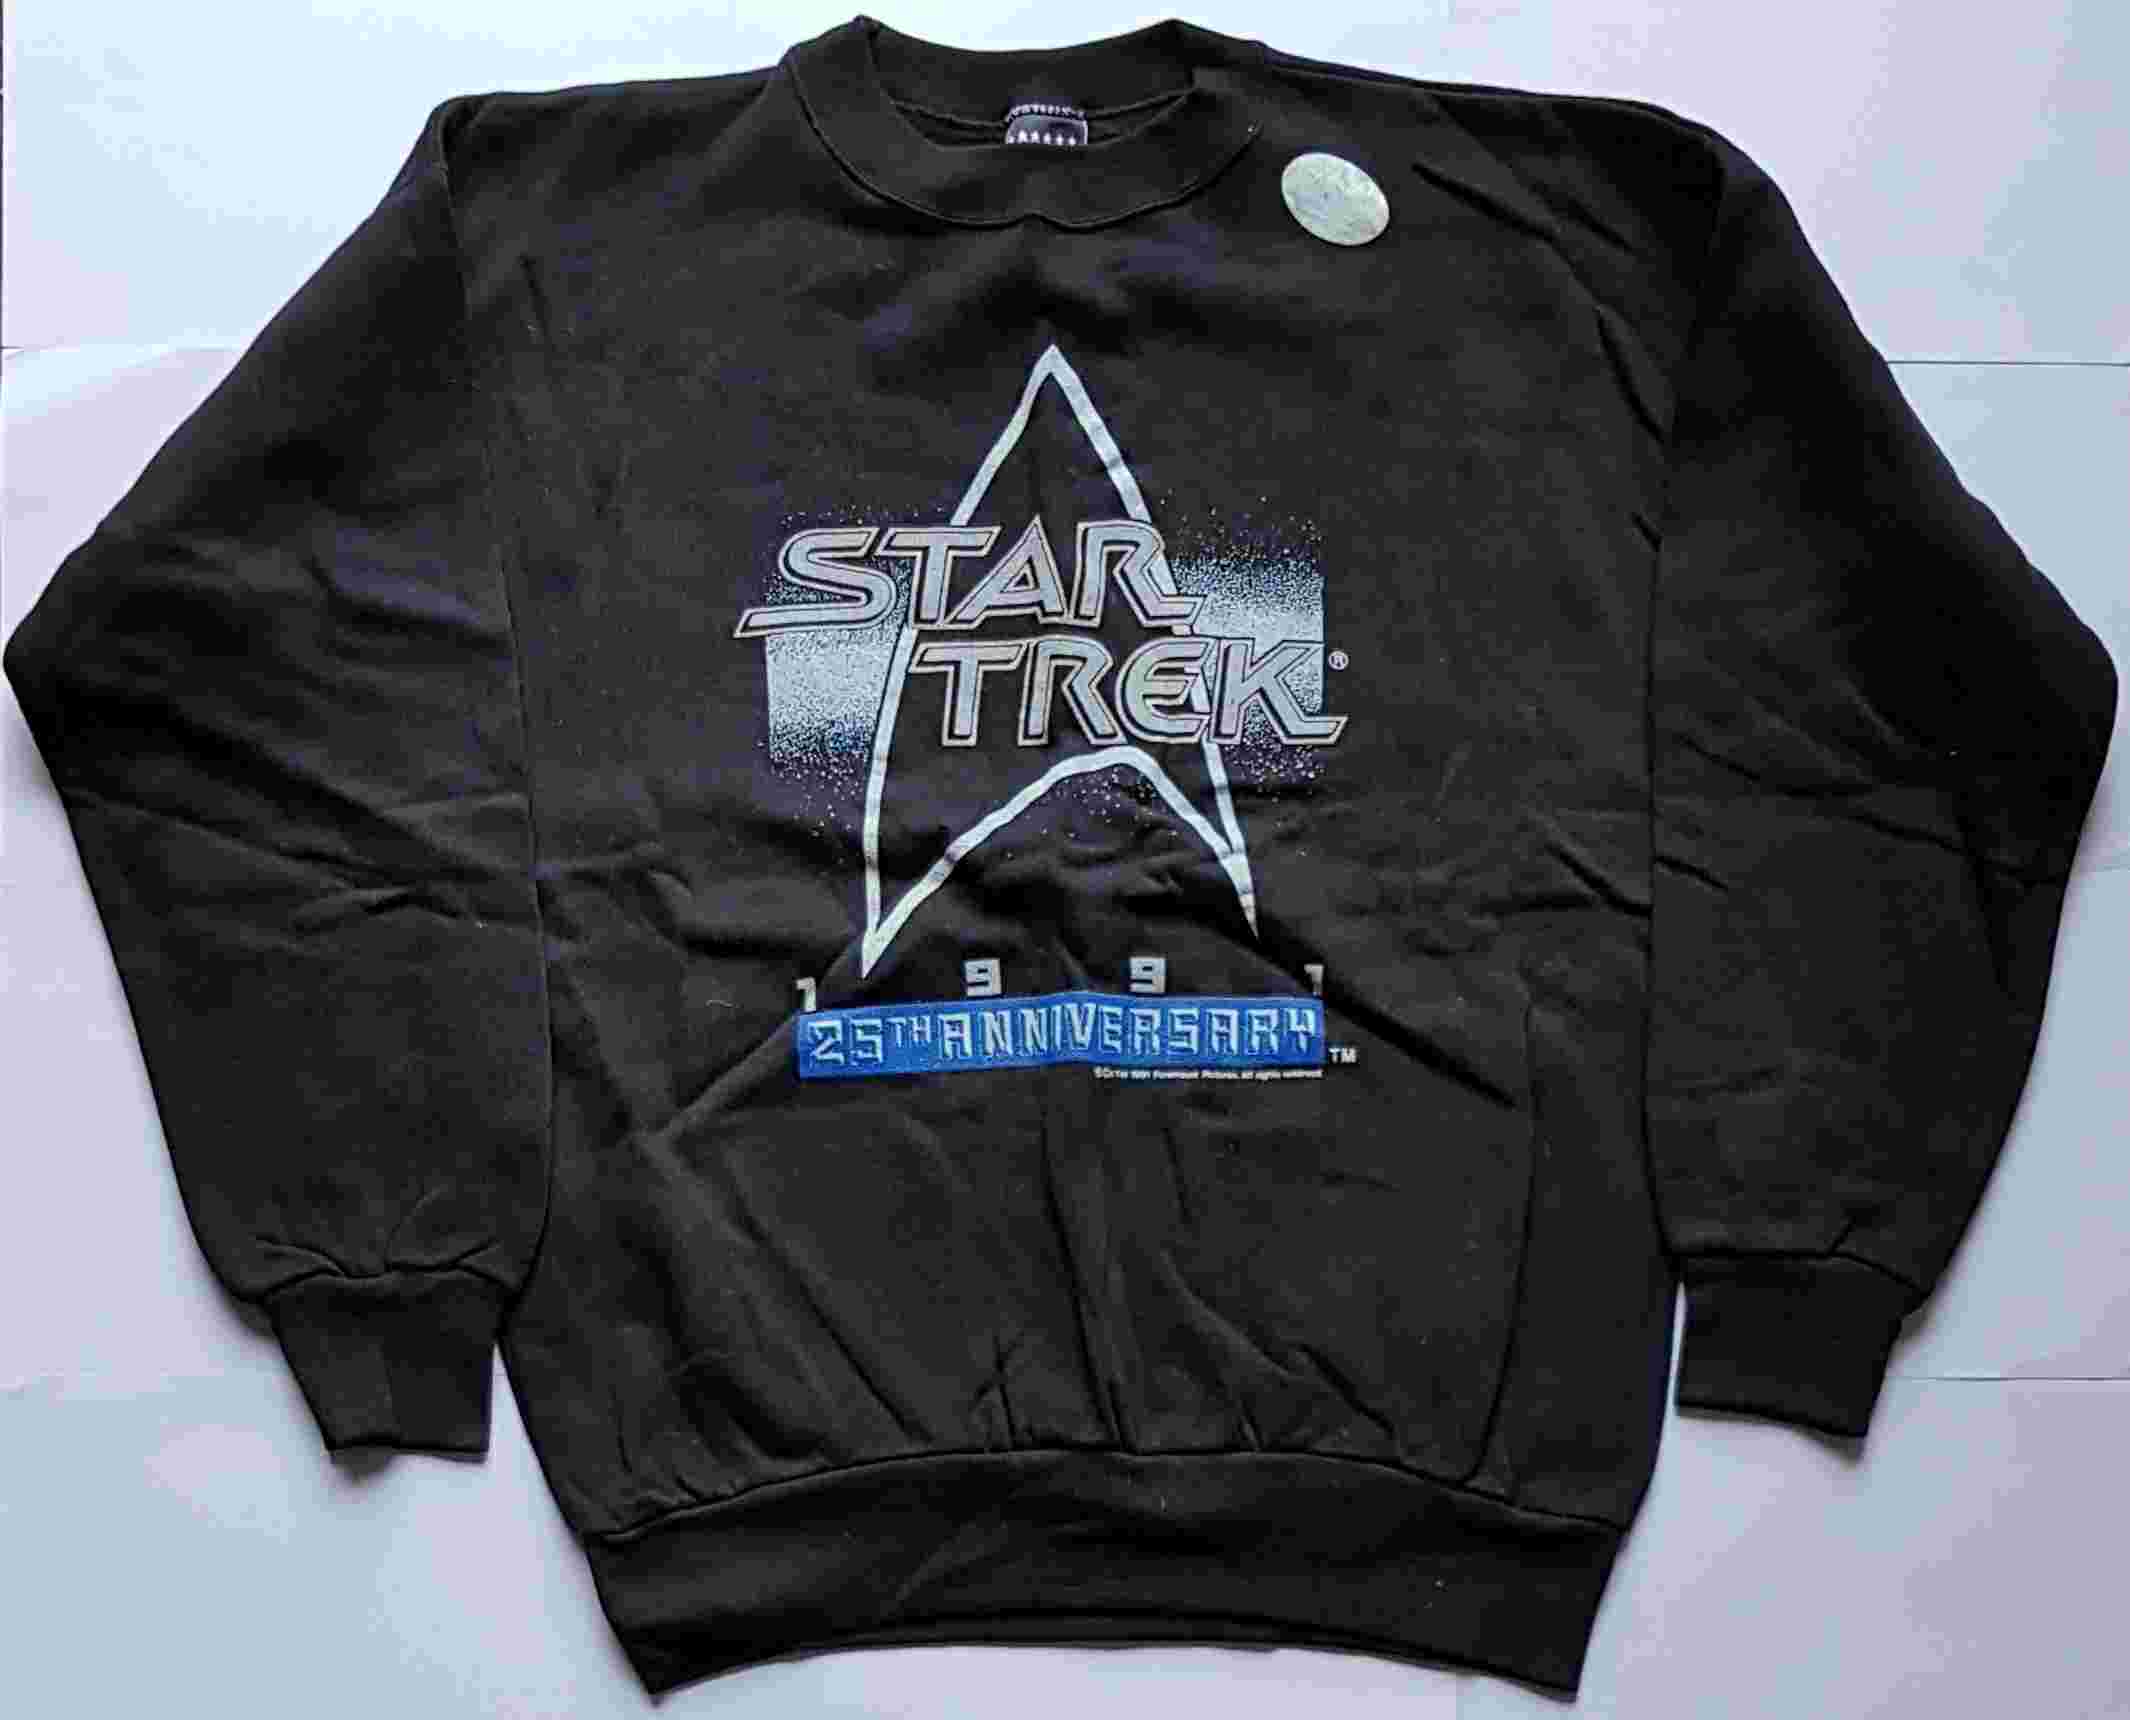 Picture of J-ST25 25th anniversary by artist Star Trek from the BBC clothes - Records and Tapes library